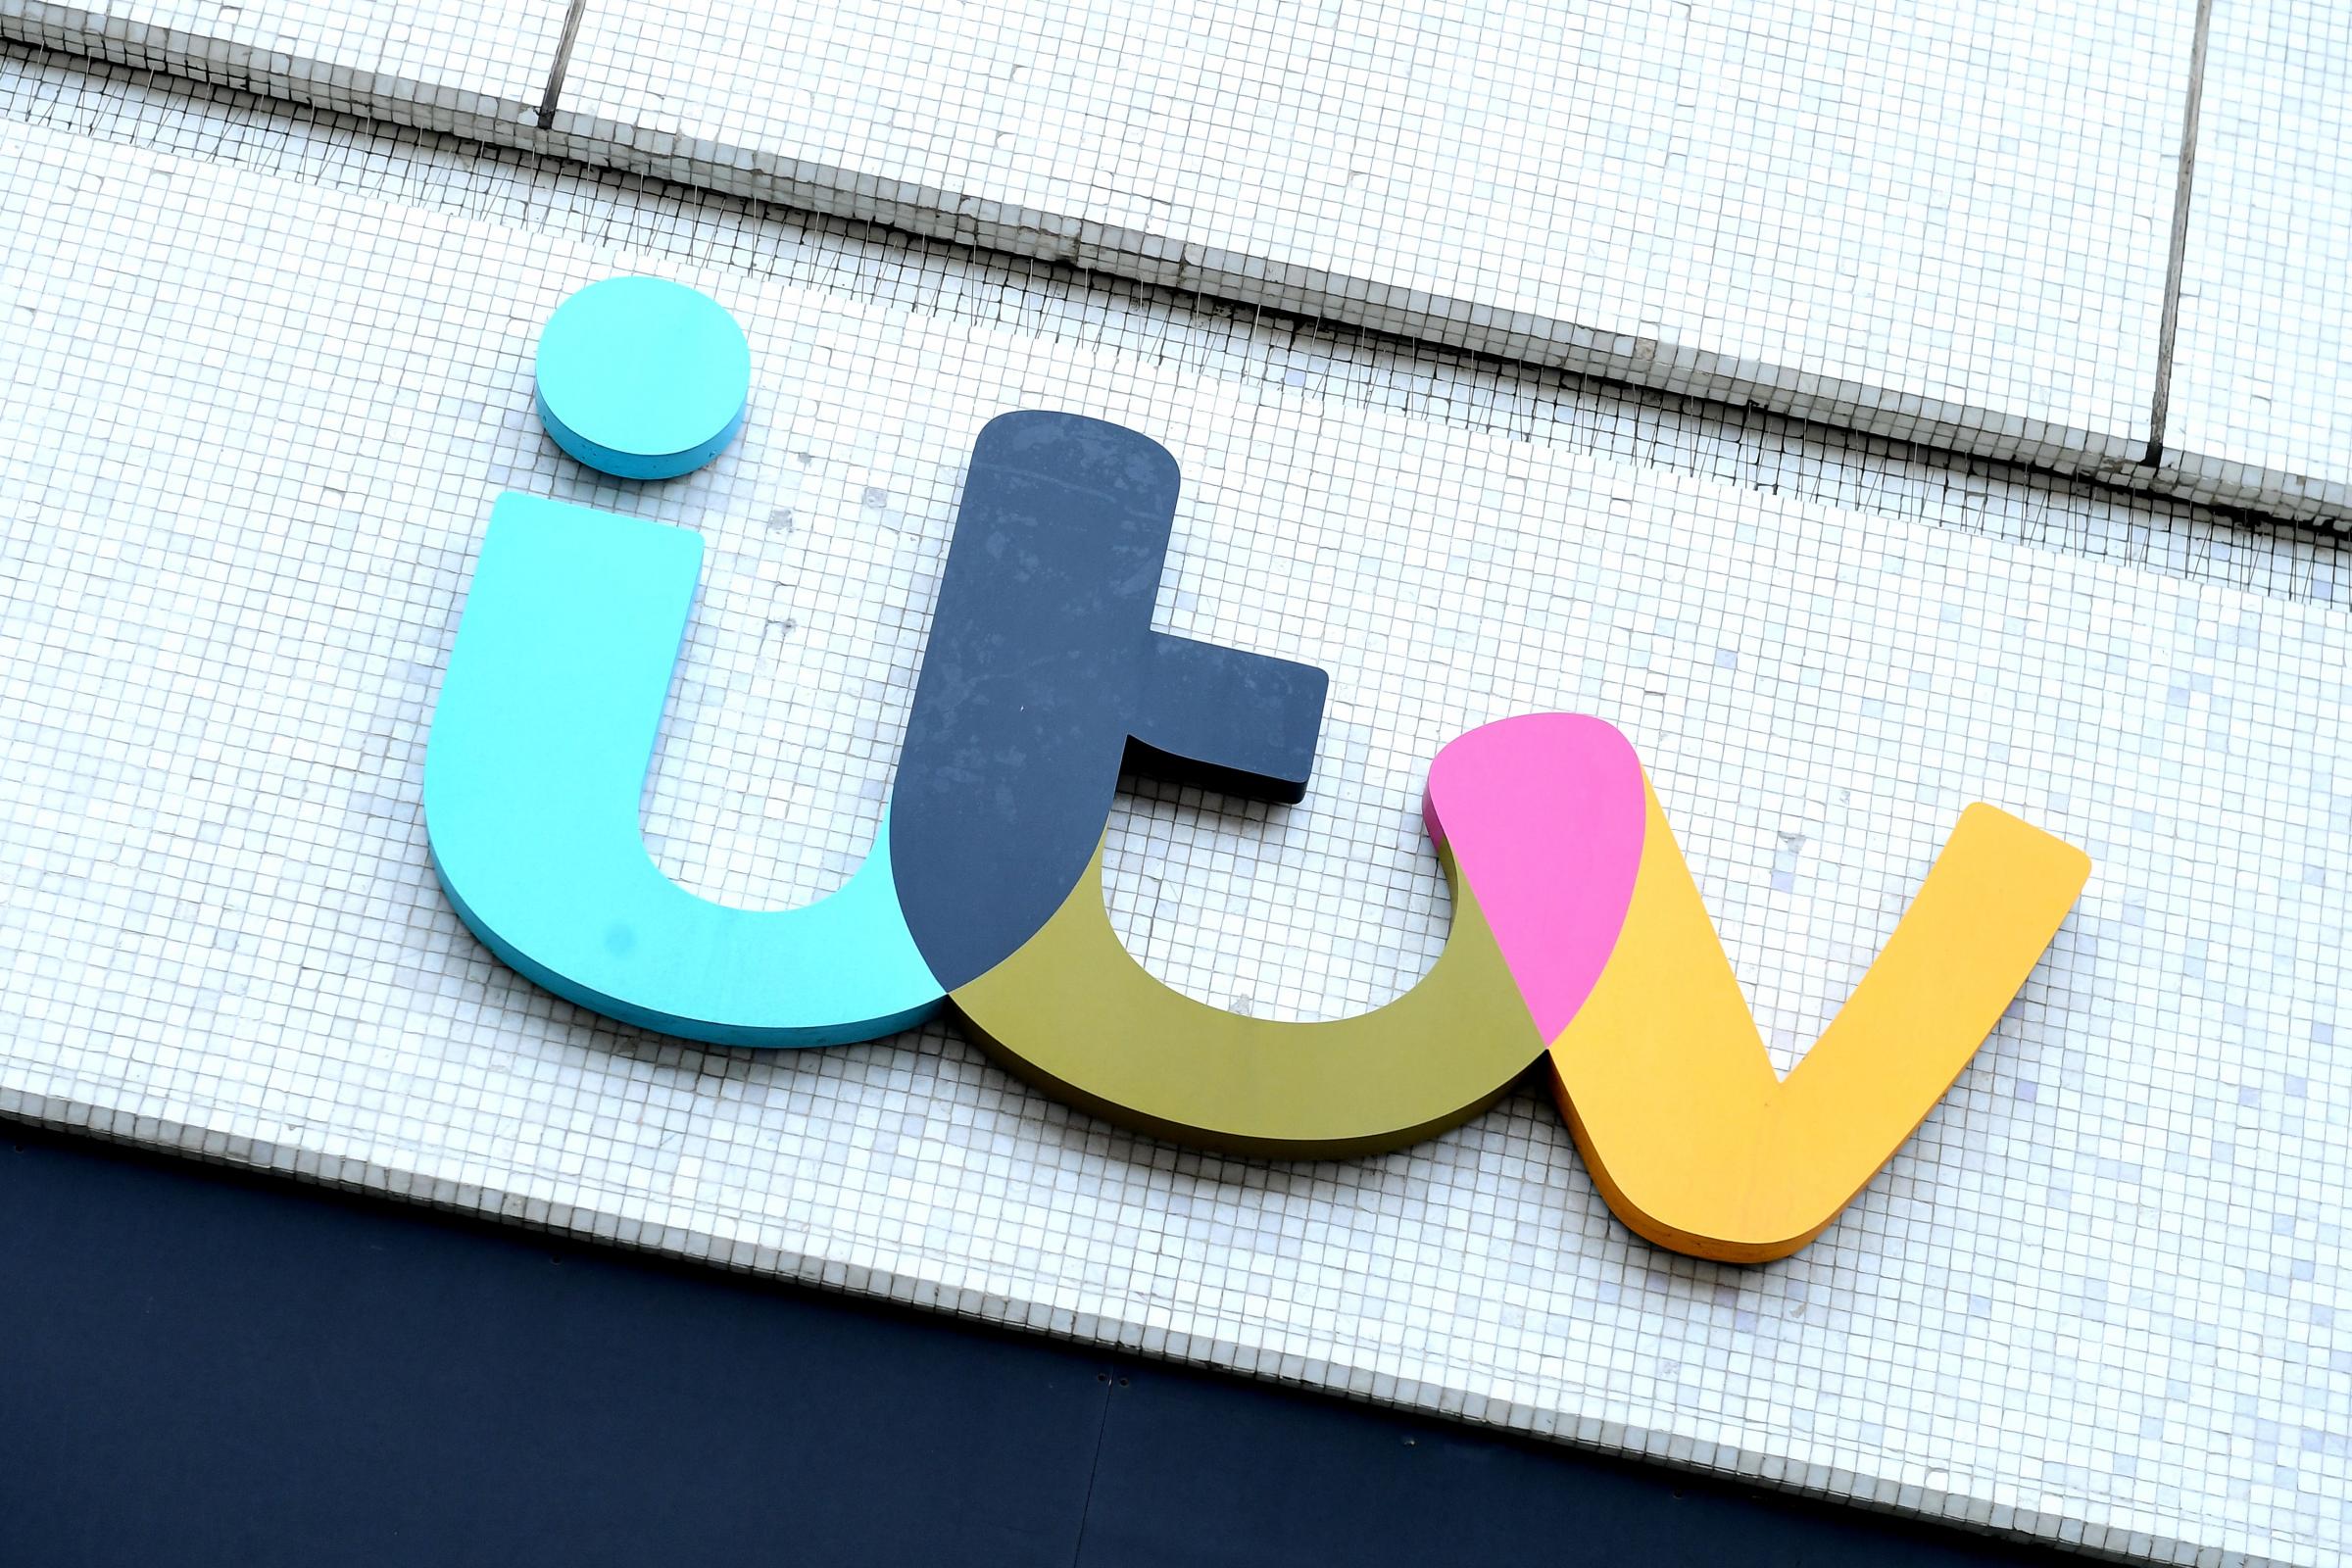 Itv Down Itv Hub Stops Working In The Uk During Euros The Argus